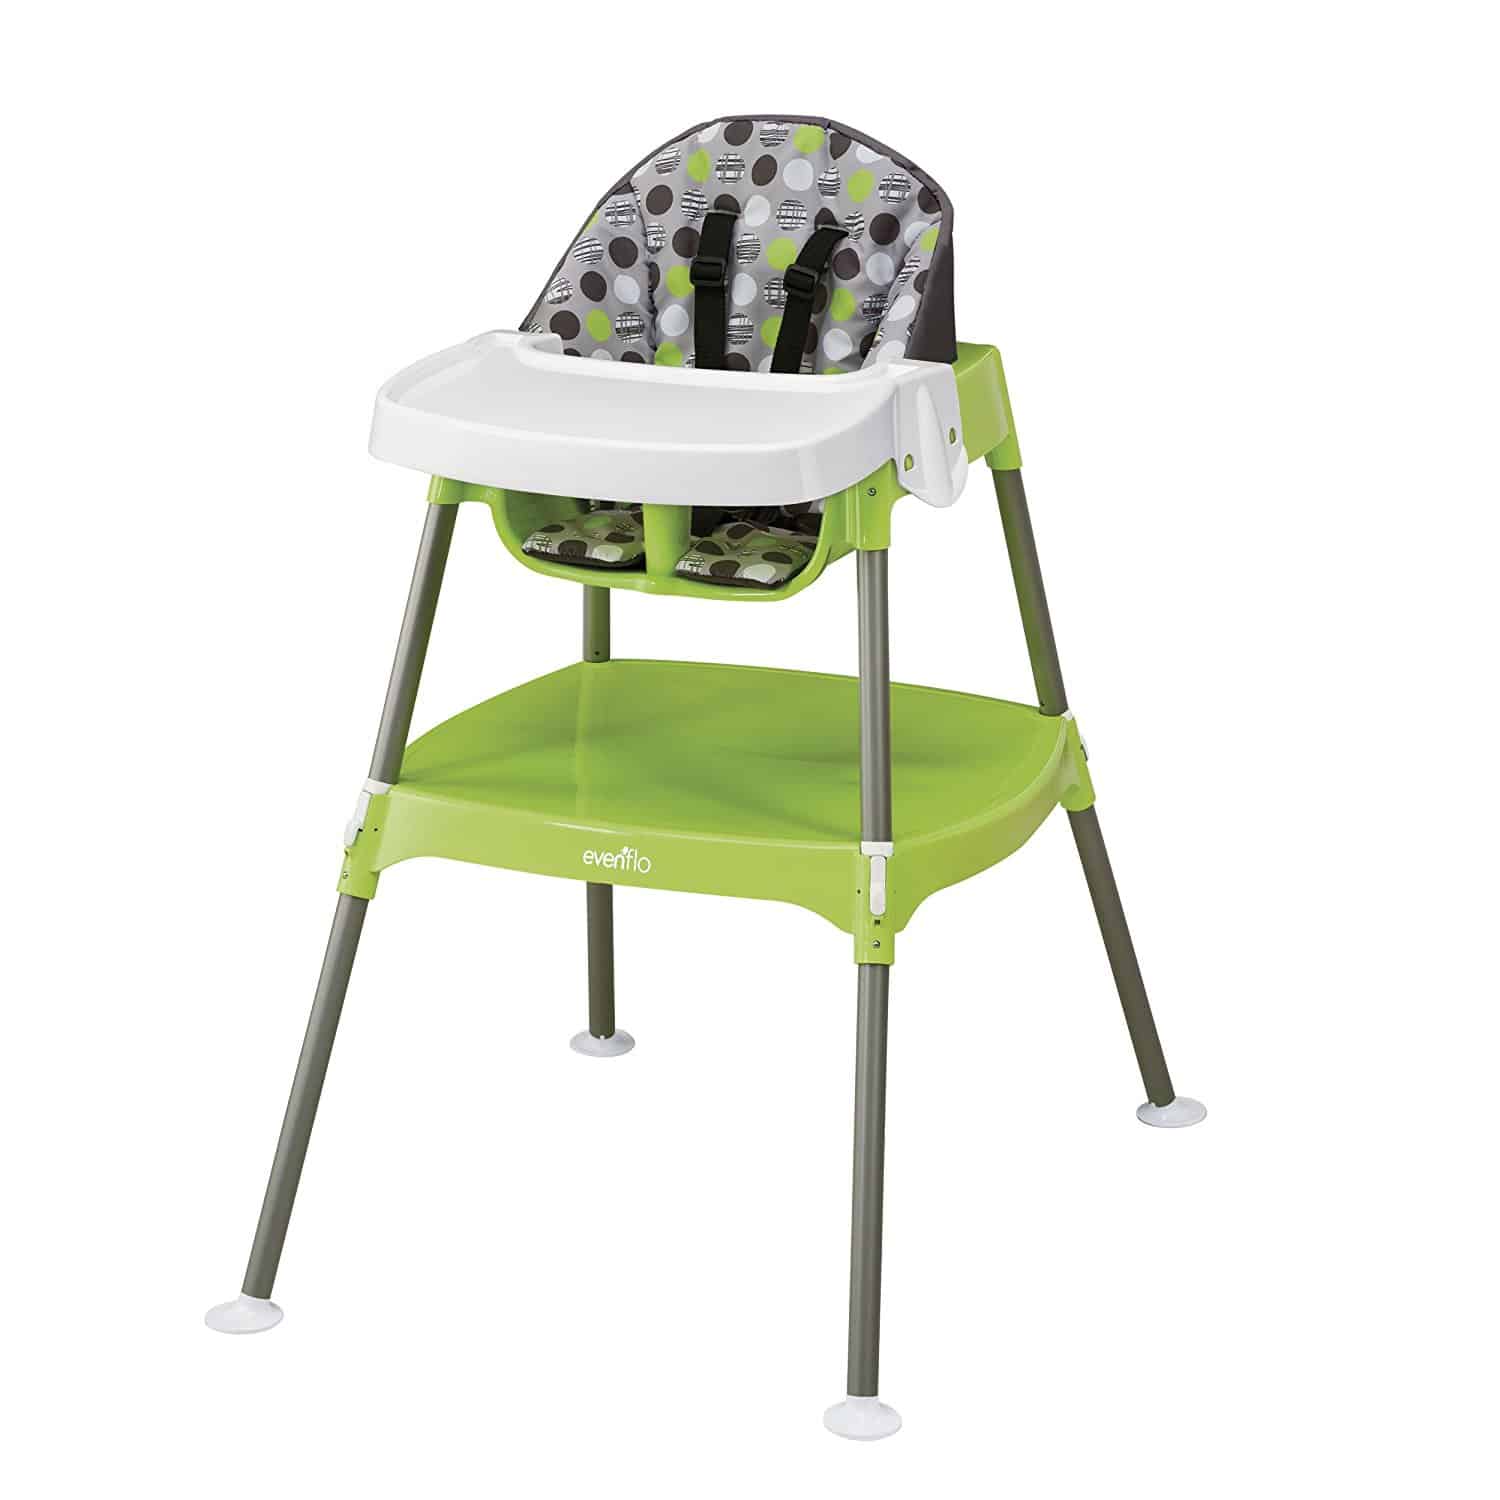 High Chair brand review Evenflo Baby Bargains